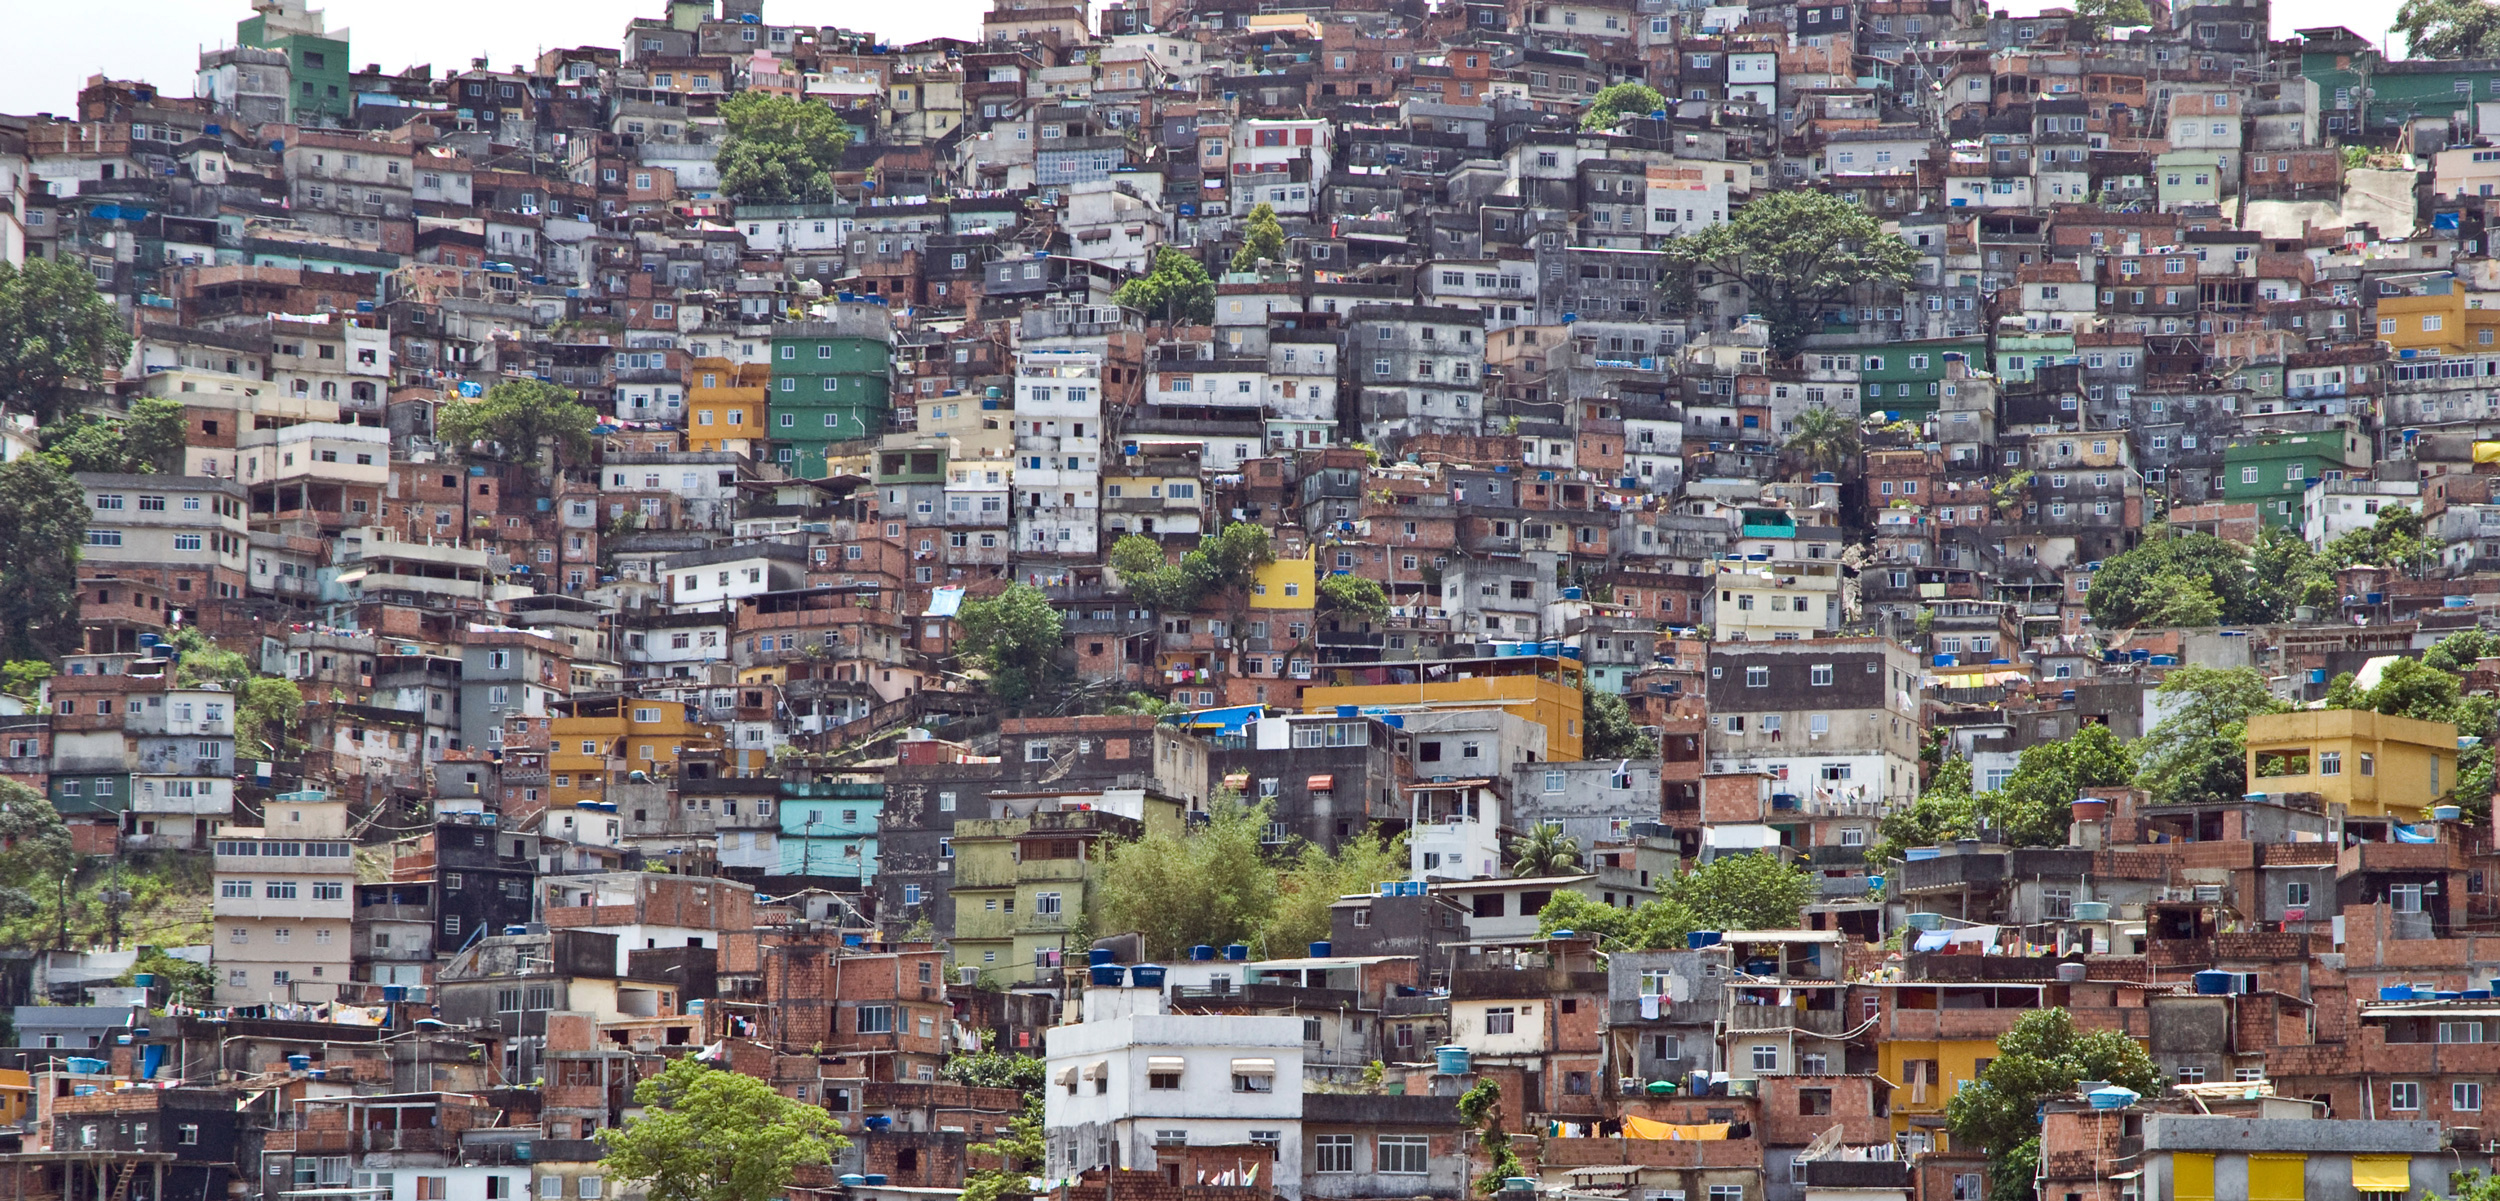 Favelas are the poor neighborhoods on the hillsides above the wealthy enclaves of old Rio de Janeiro. For the most part, residents of the favelas have been left out of the Olympic legacy. Photo by Simon Lowthian/Alamy Stock Photo